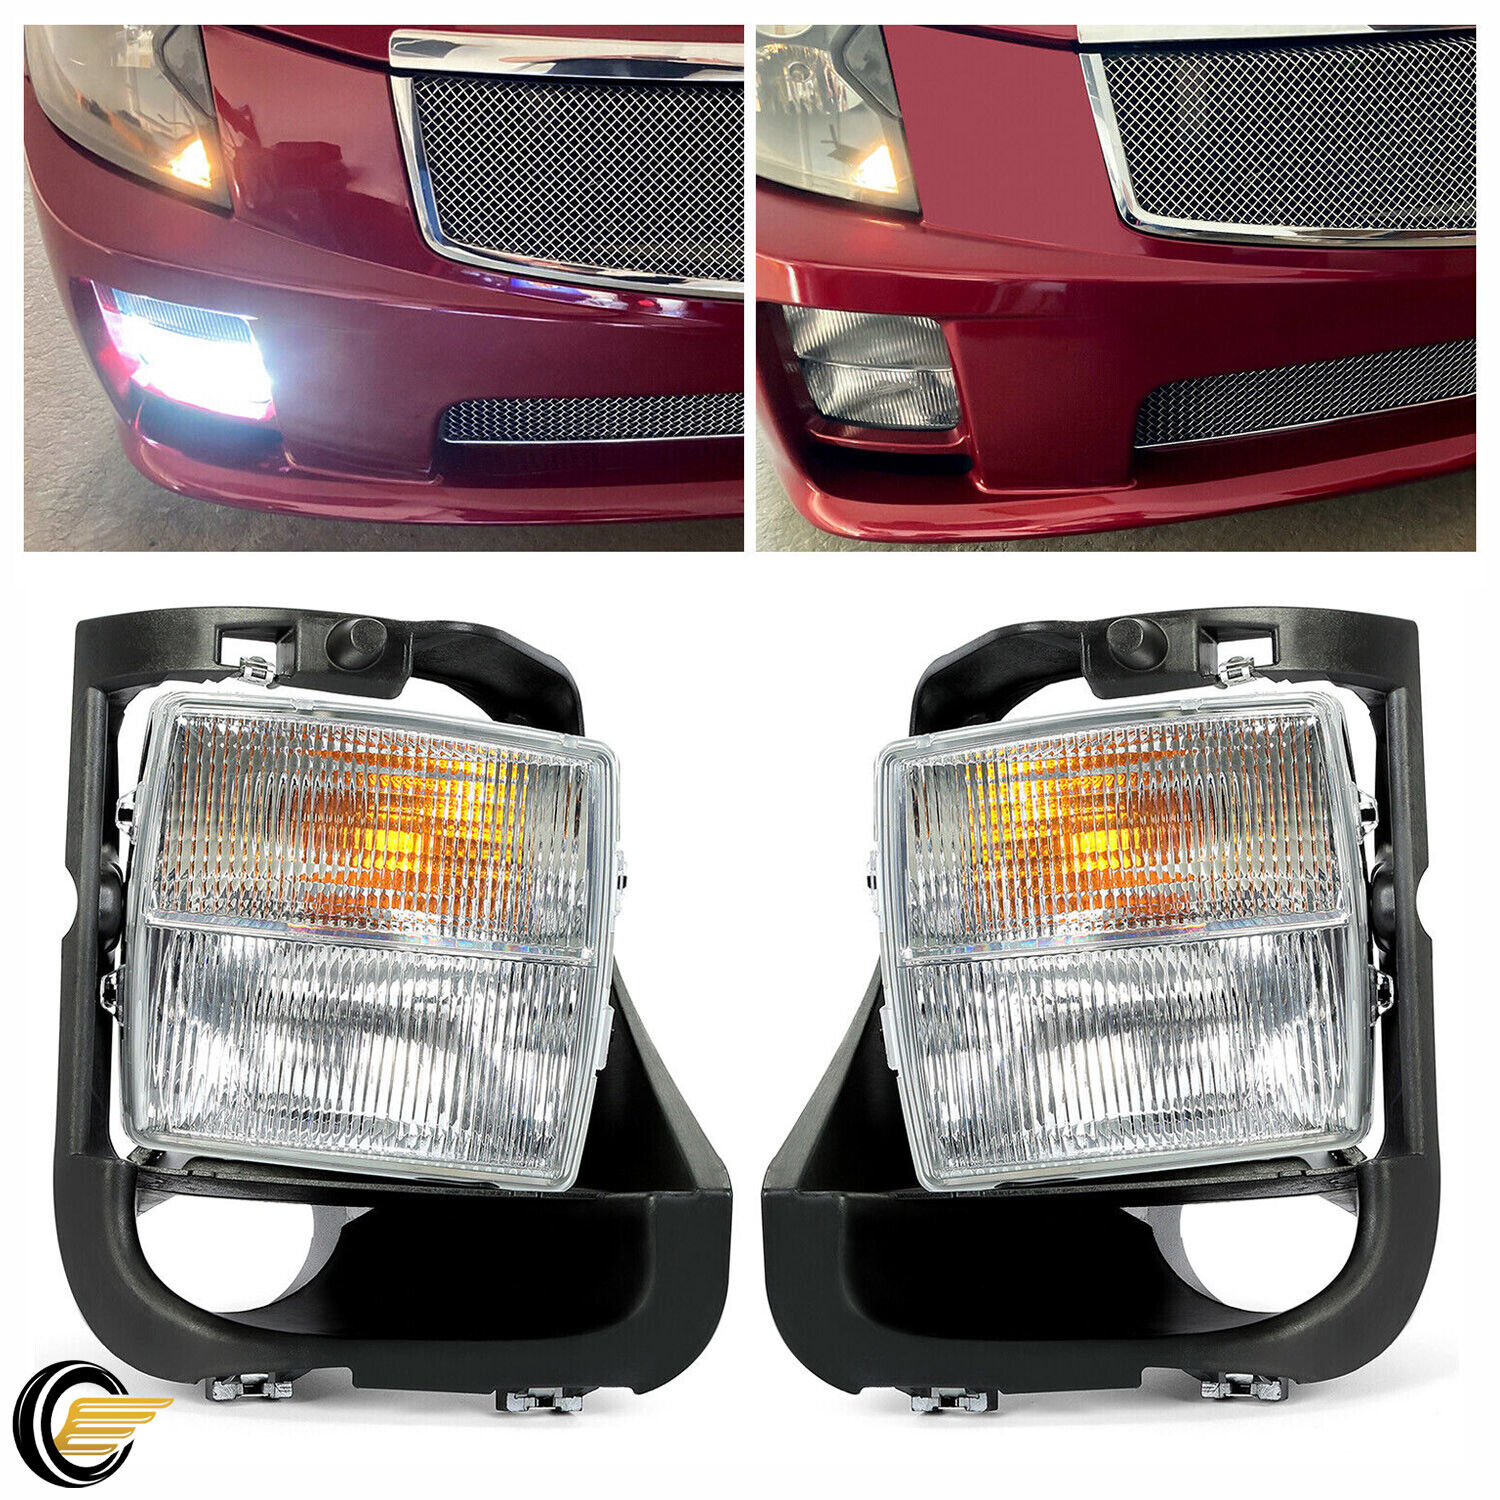 New Clear Lens Fog Light & Signal Light Kit Fit For 2004-2007 Cadillac CTS CTS-V